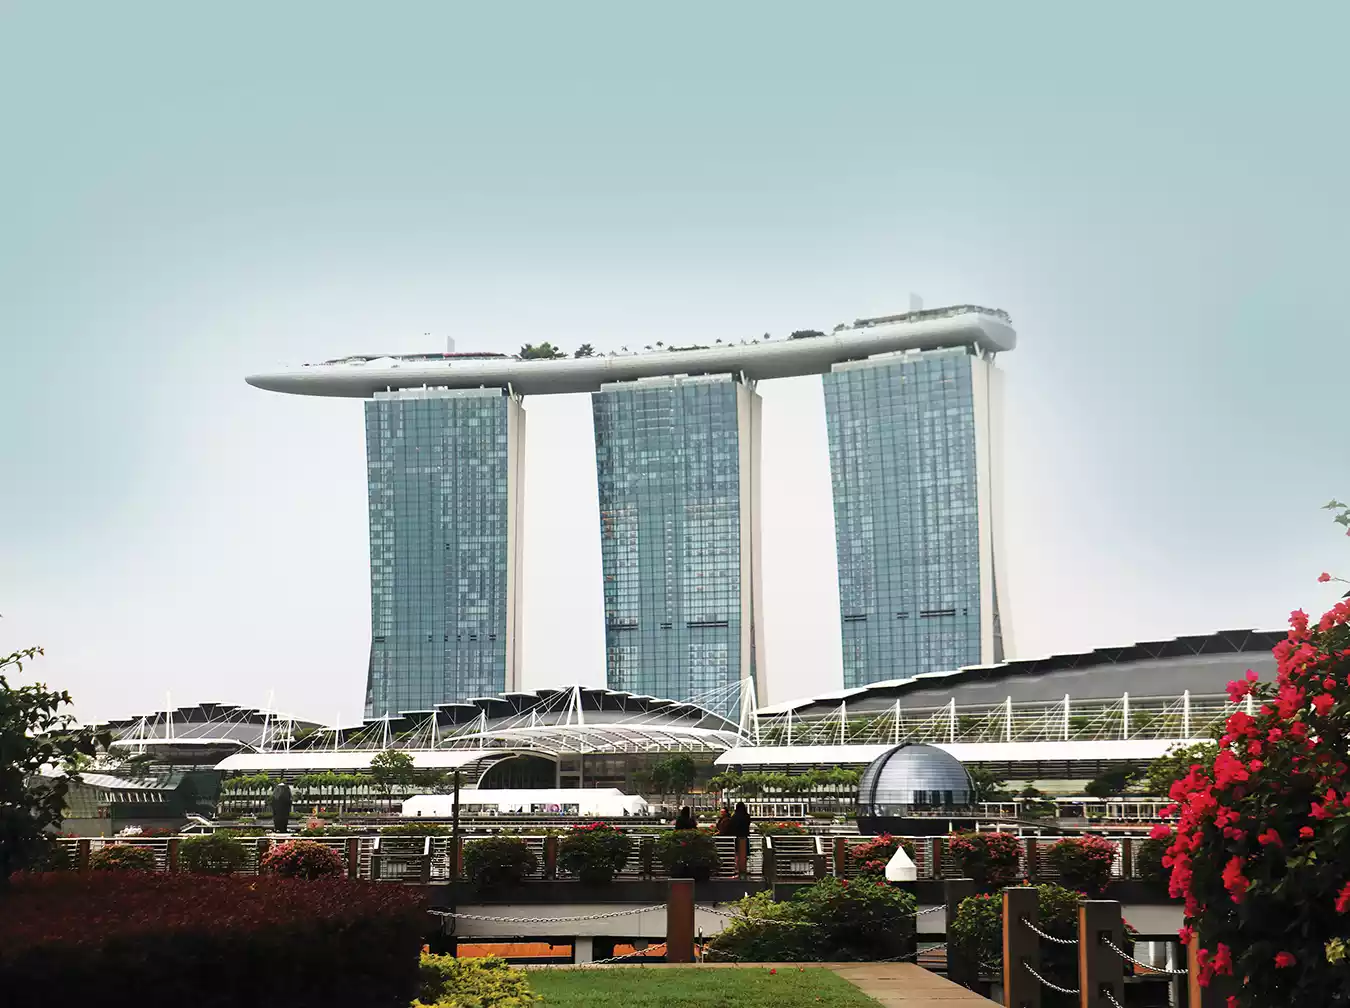 Marina Bay Sands is a premiere host of MICE events in Singapore